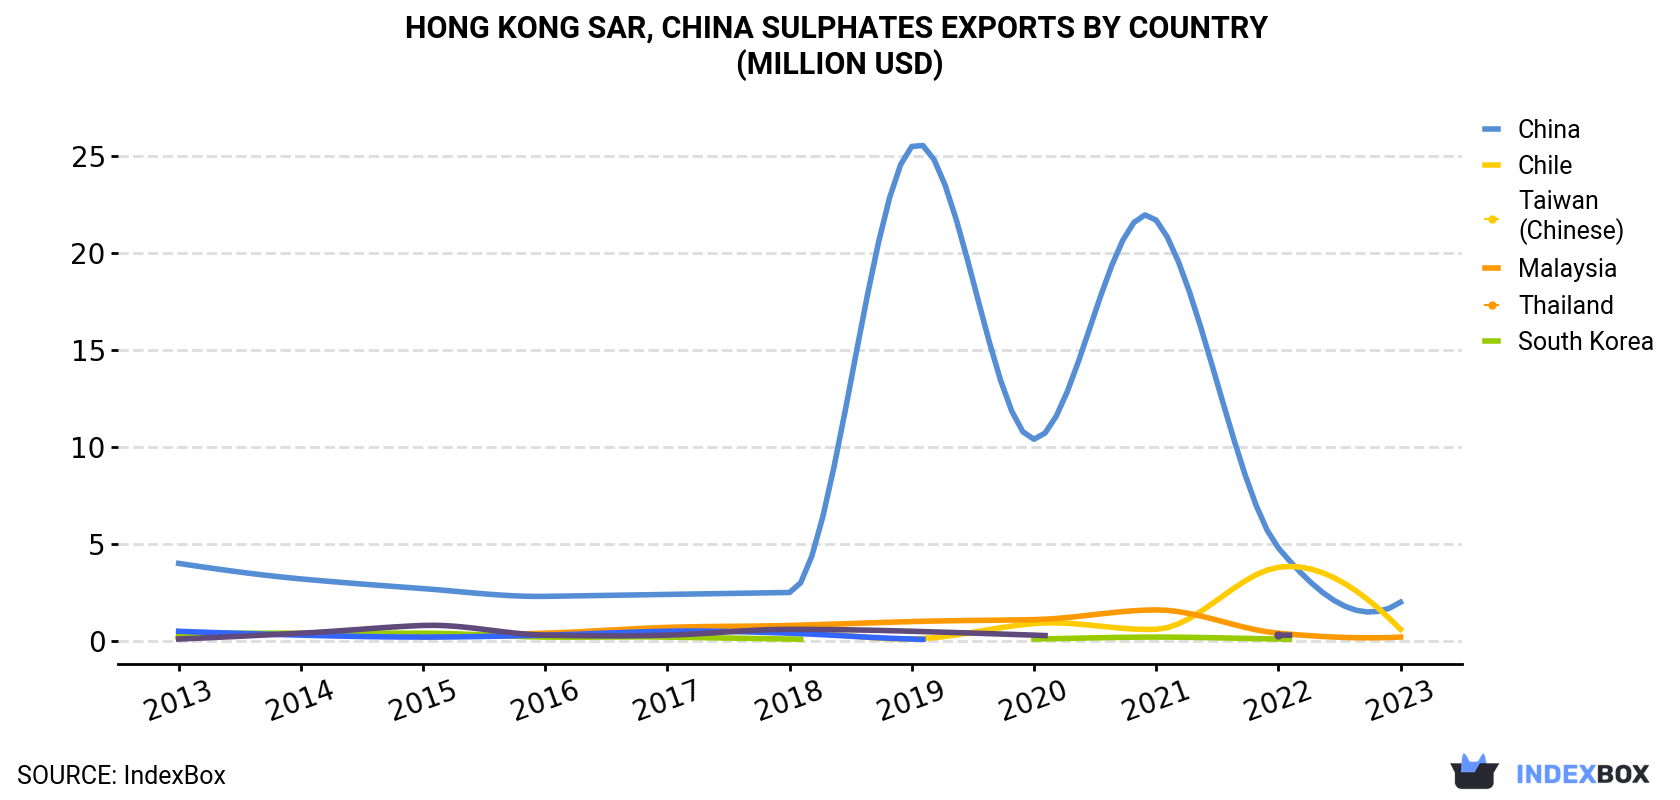 Hong Kong Sulphates Exports By Country (Million USD)